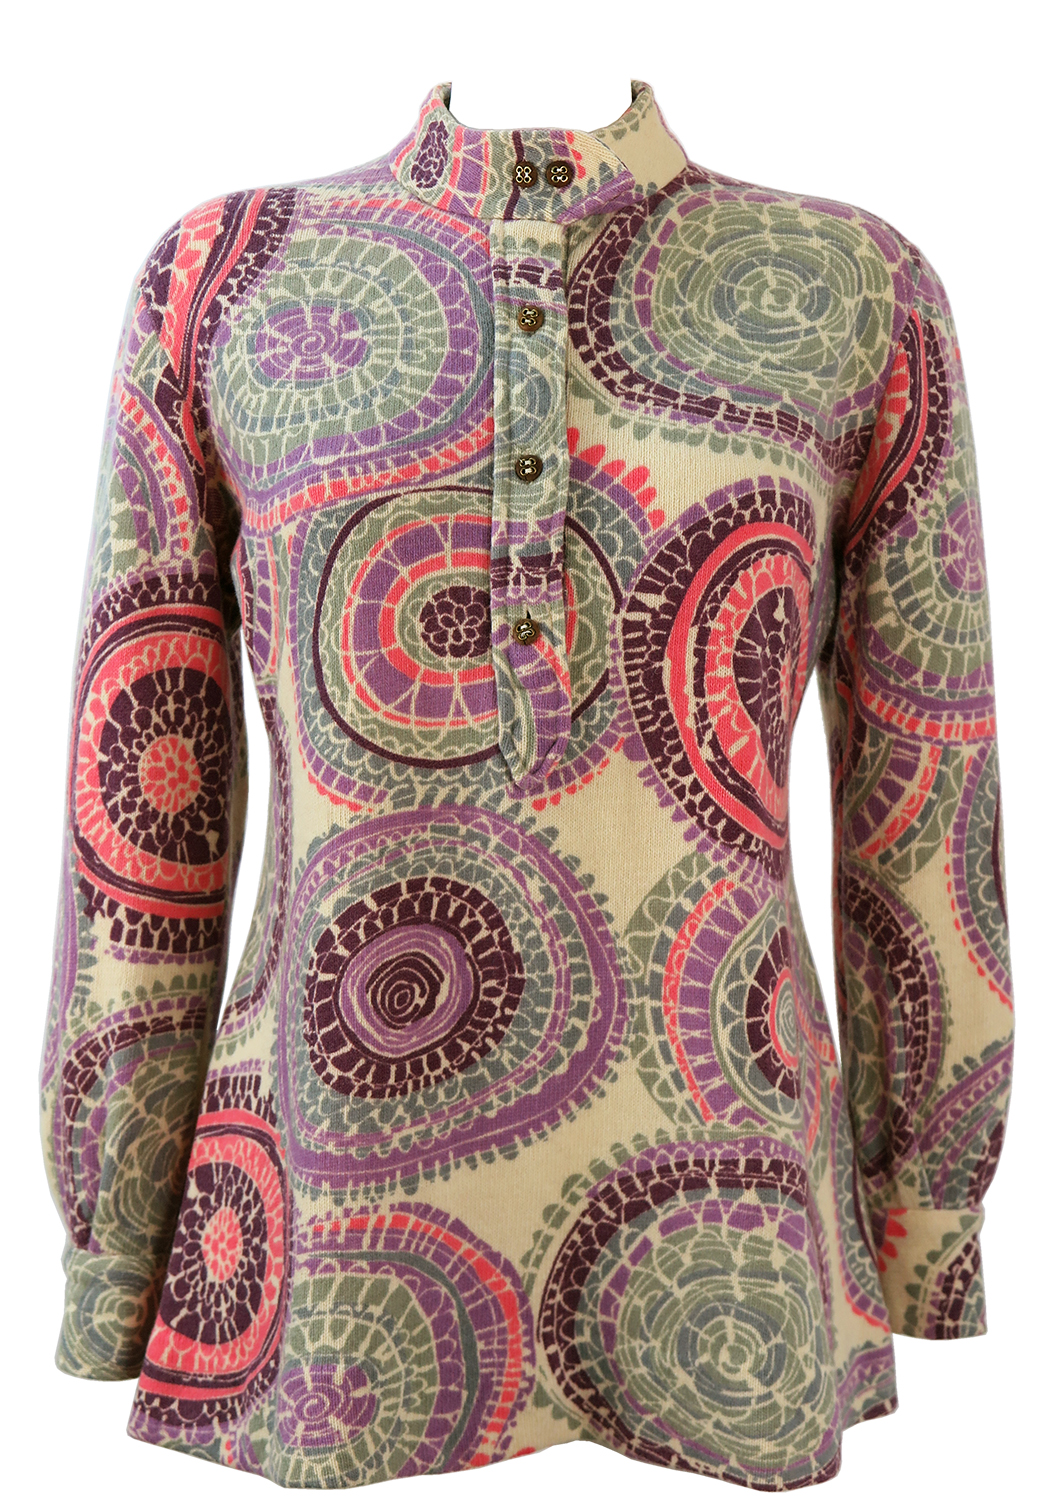 Vintage 1960's Tunic Jumper with Psychedelic Print - M/L | Reign Vintage